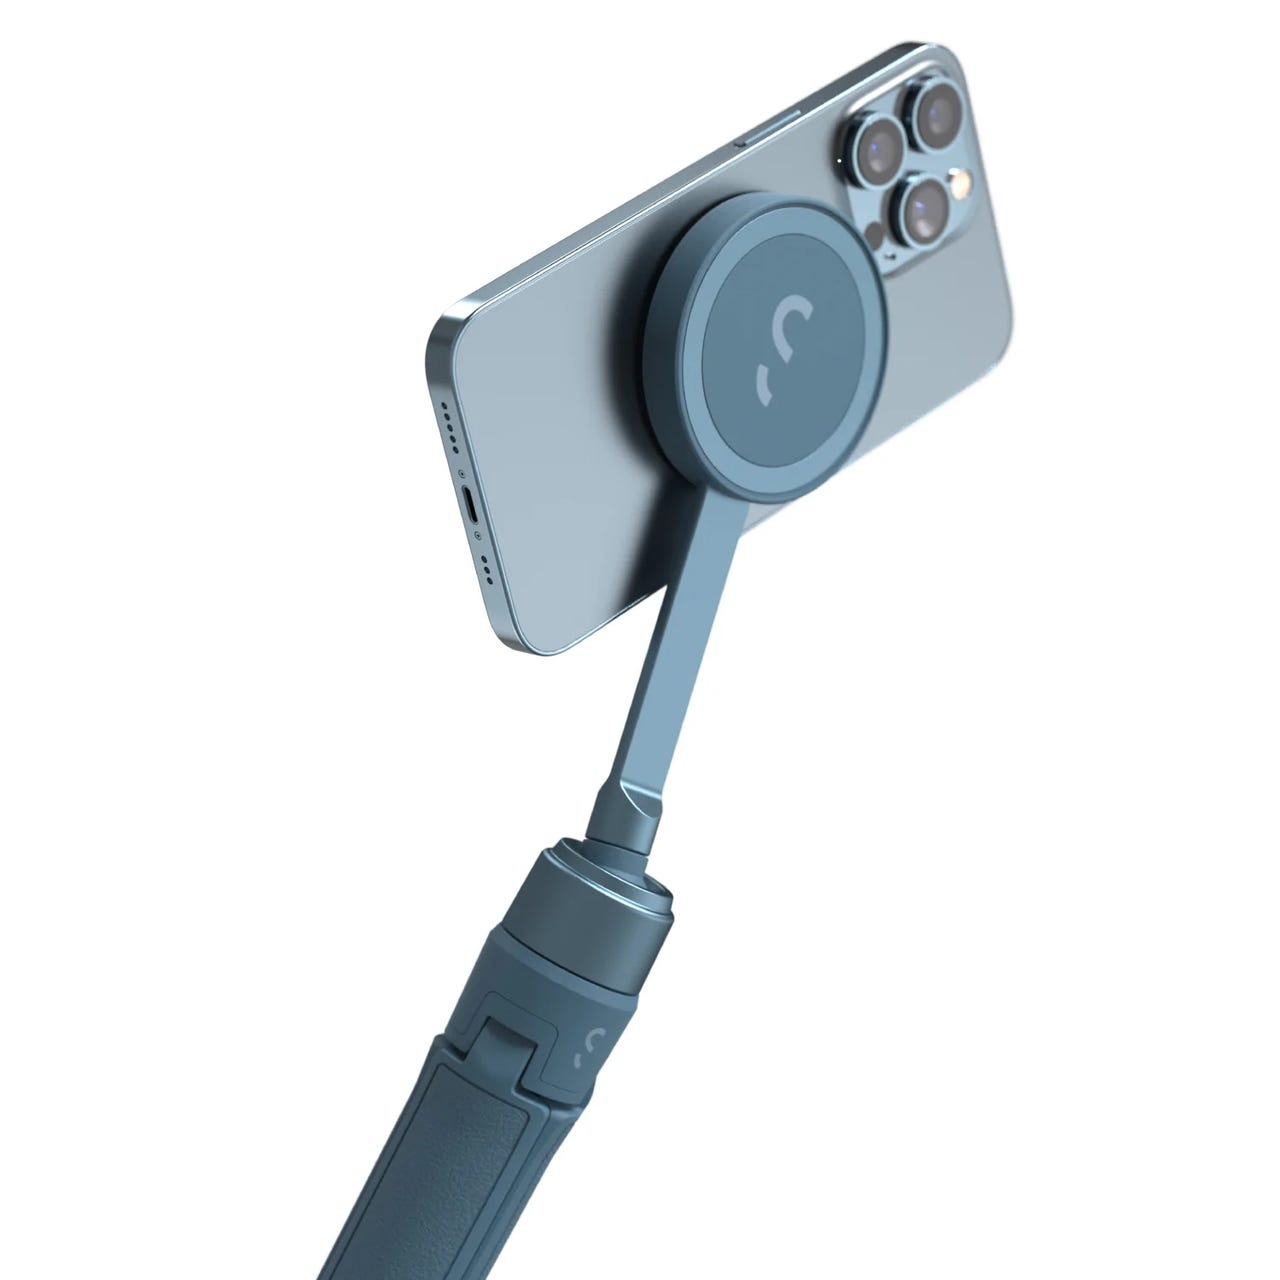 iPhone accessories: Shiftcam's SnapGrip power bank, light and tripod boost  your photo options